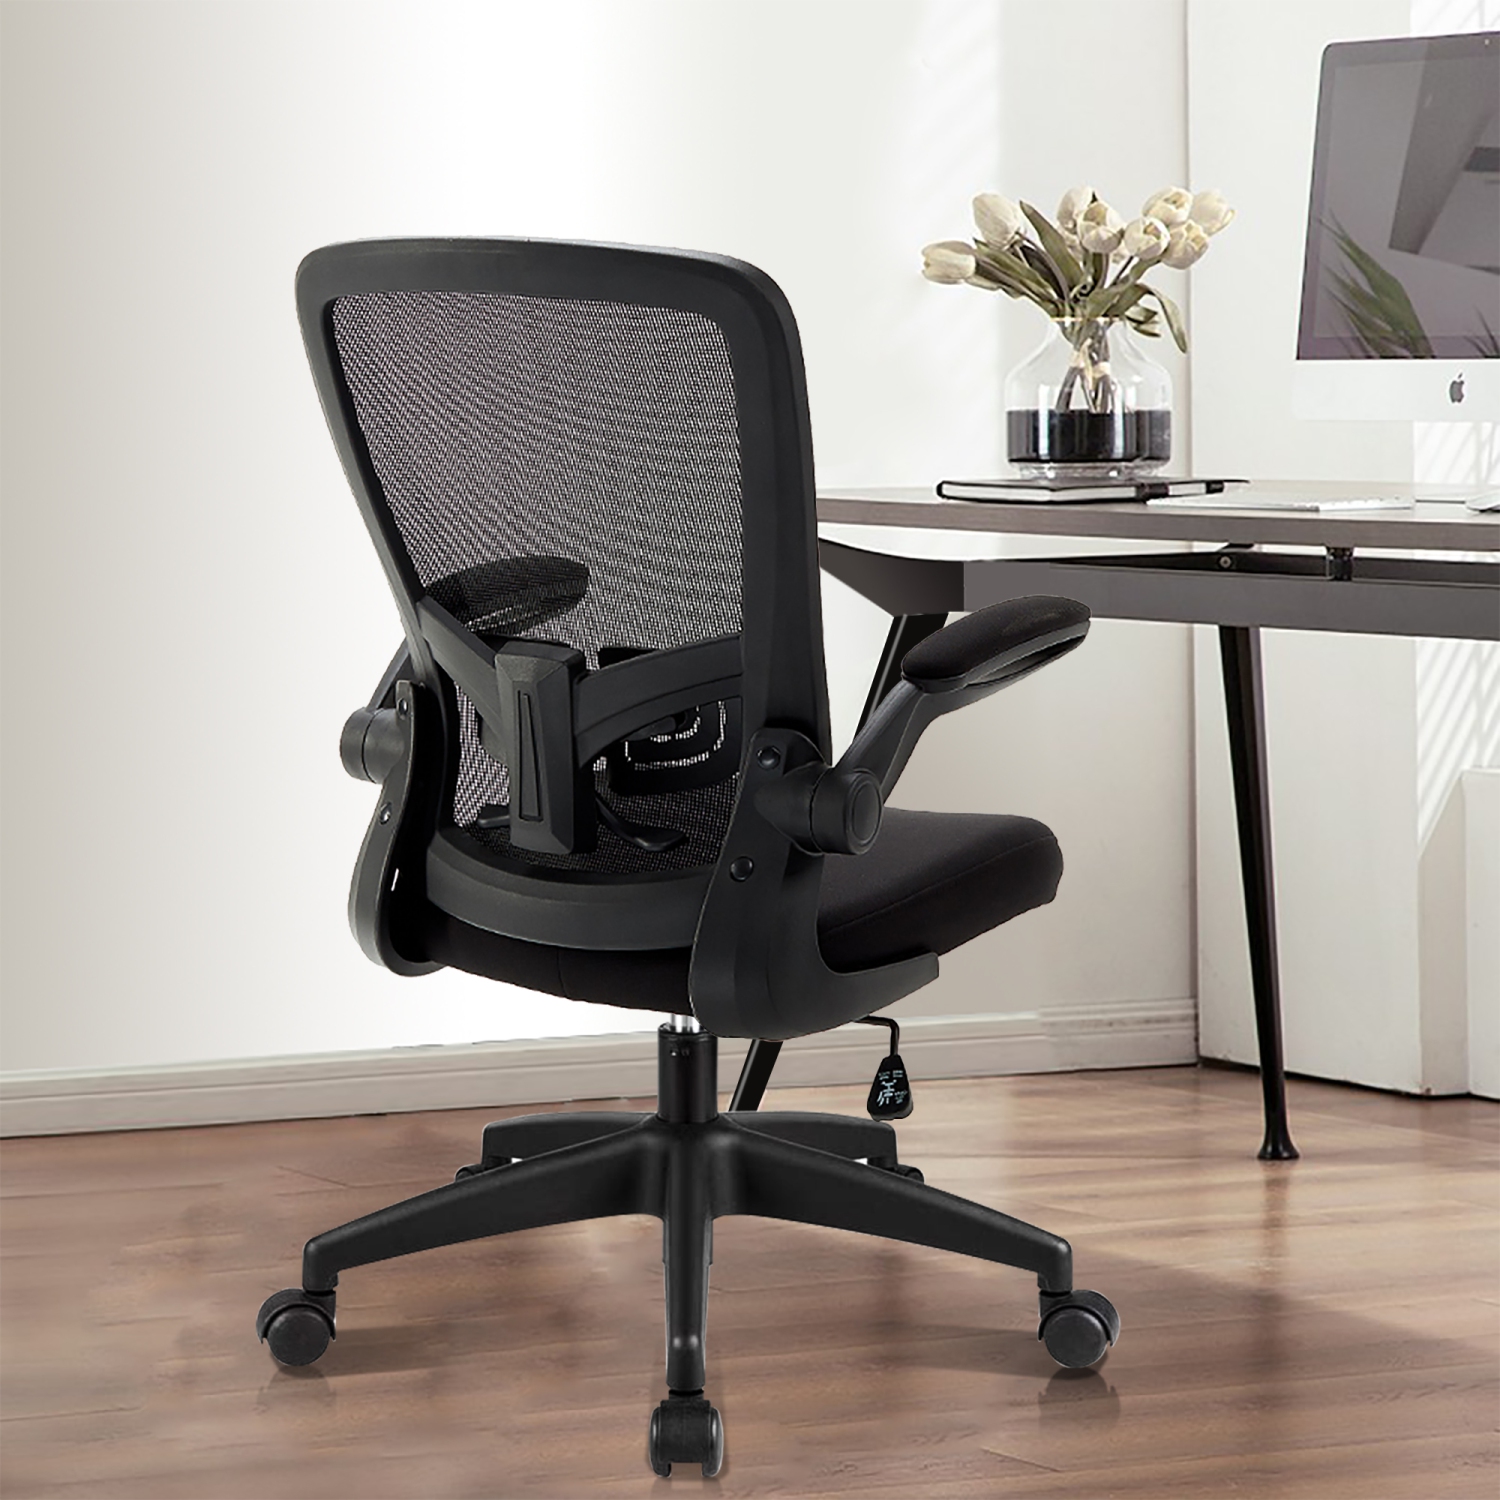 CoolHut Office Chair - Ergonomic Desk Chair with Swivel Lumbar Support and Flip up Arms - Black